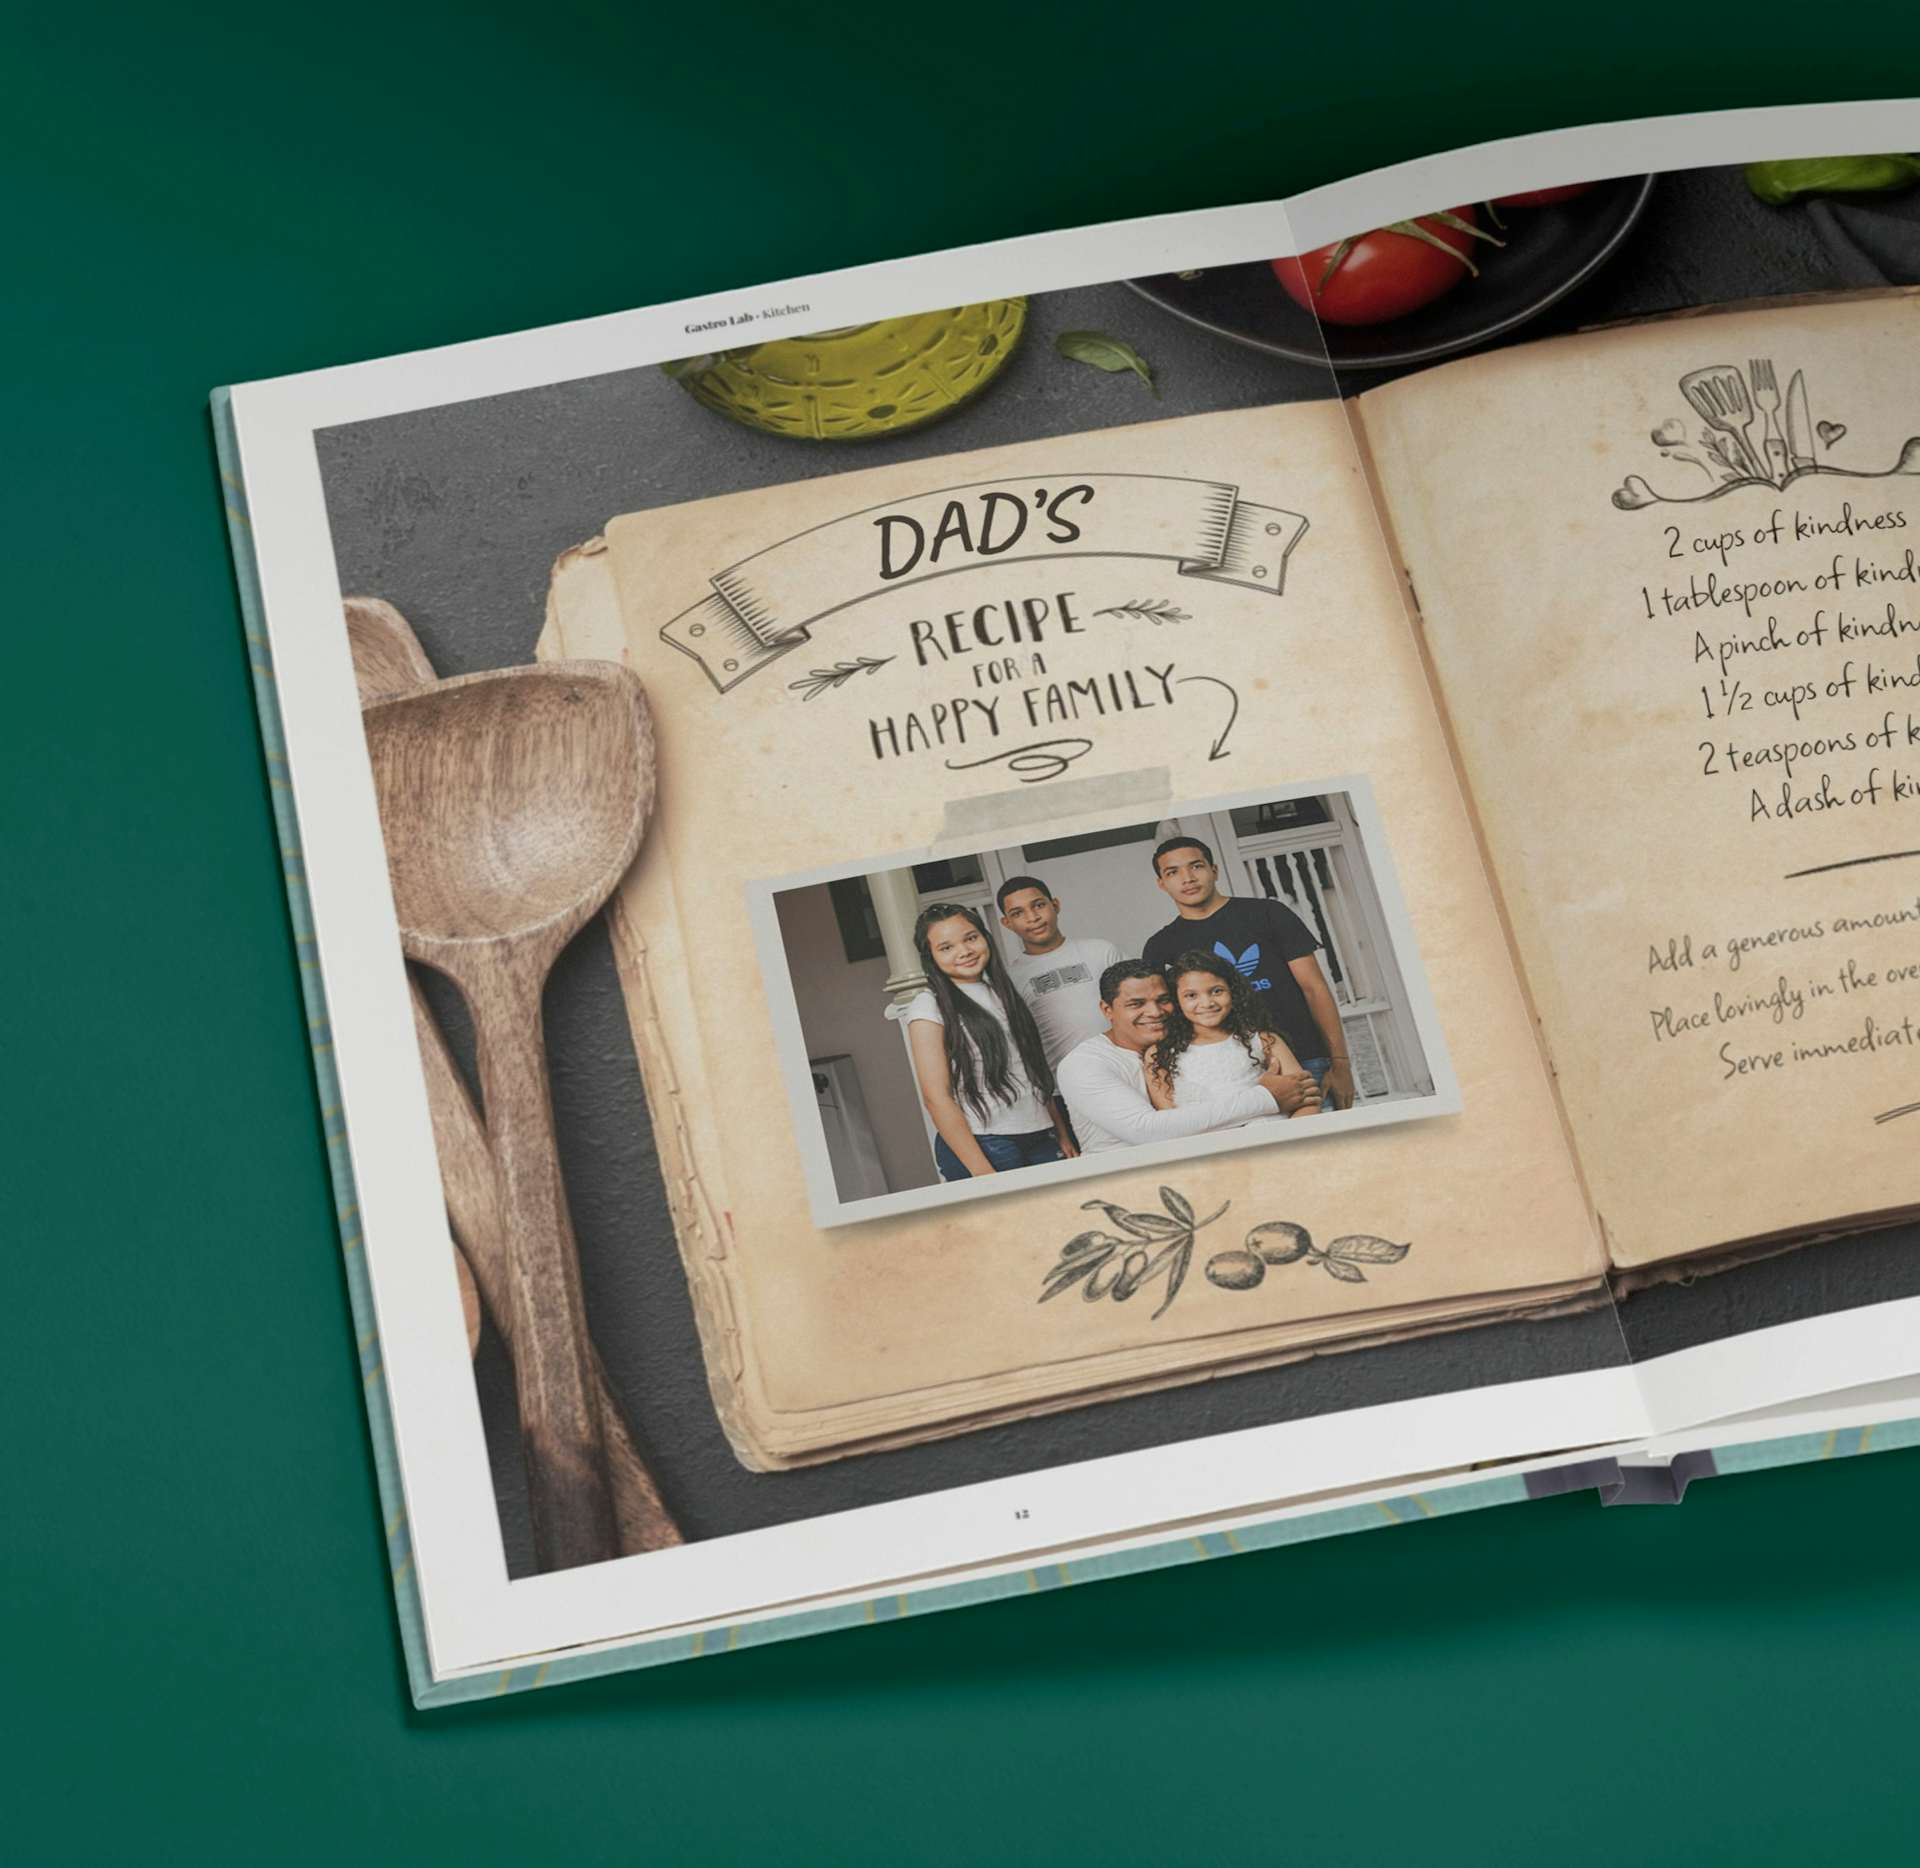 A page inside the personalised book